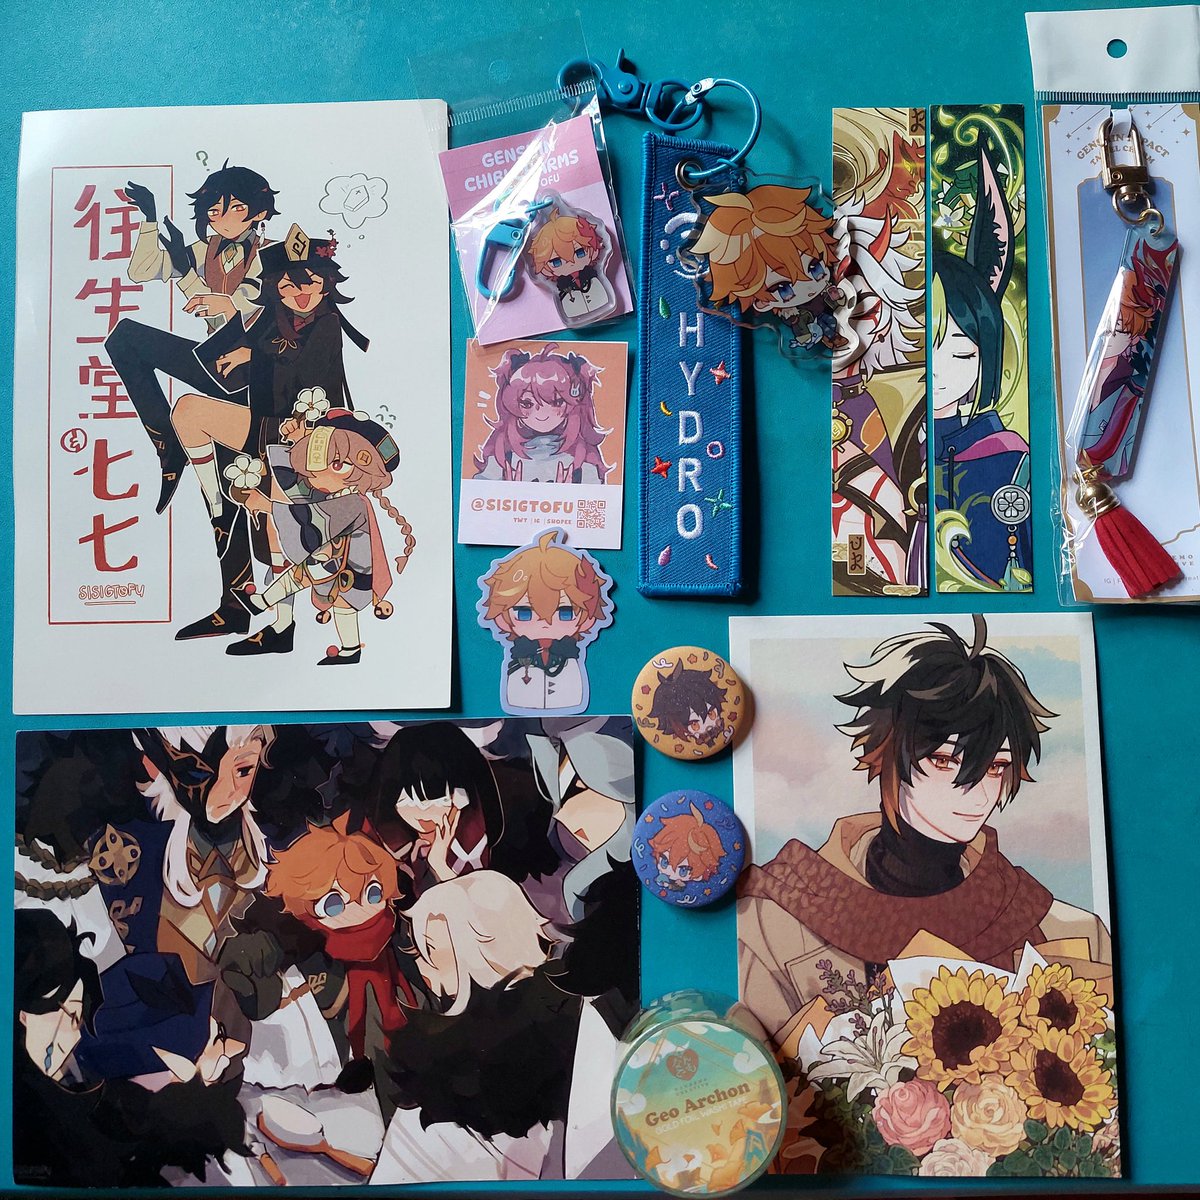 Munchable tarus and the cool zl by @sisigtofu I just had to get that taru print as the fatui favorite childe Such a fashionable zhongli and taru (couldn't get the fashion zl charm 🥹) by @misu_025 And the beautiful zl archon foil and taru tassel charm by @nandemocreative